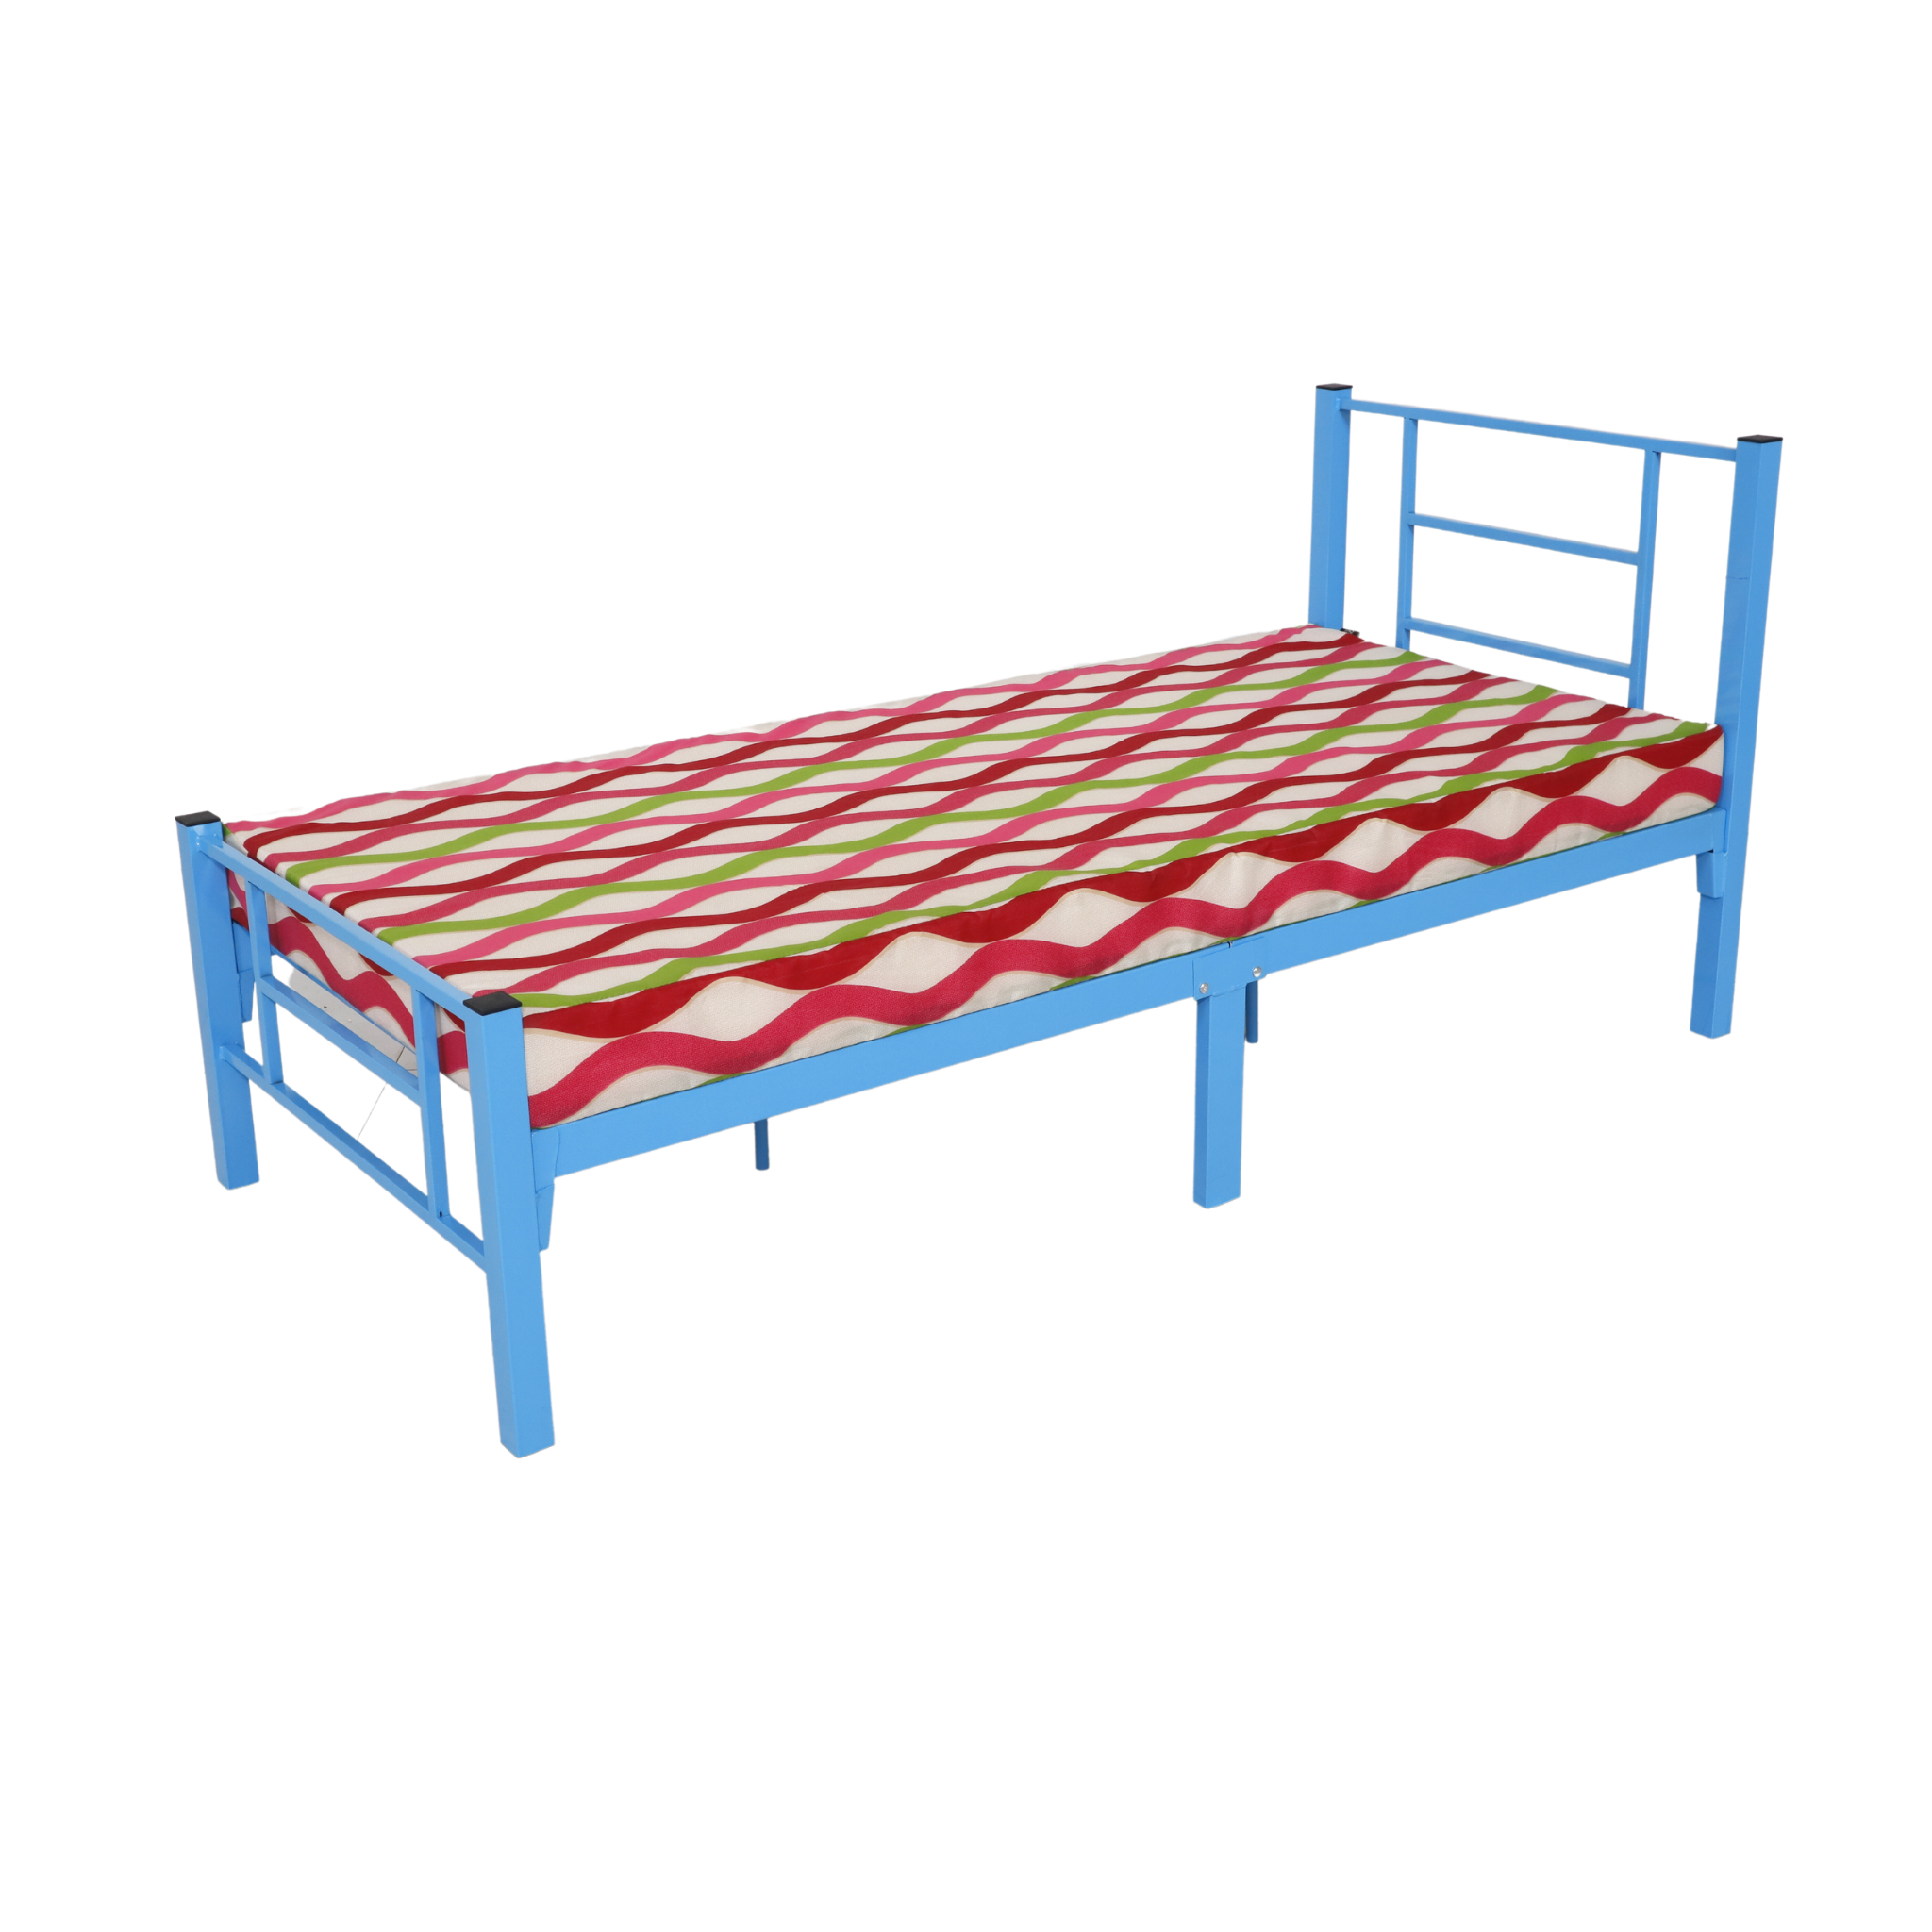 PIA Children Single Bed Frame with free mattress AF Home